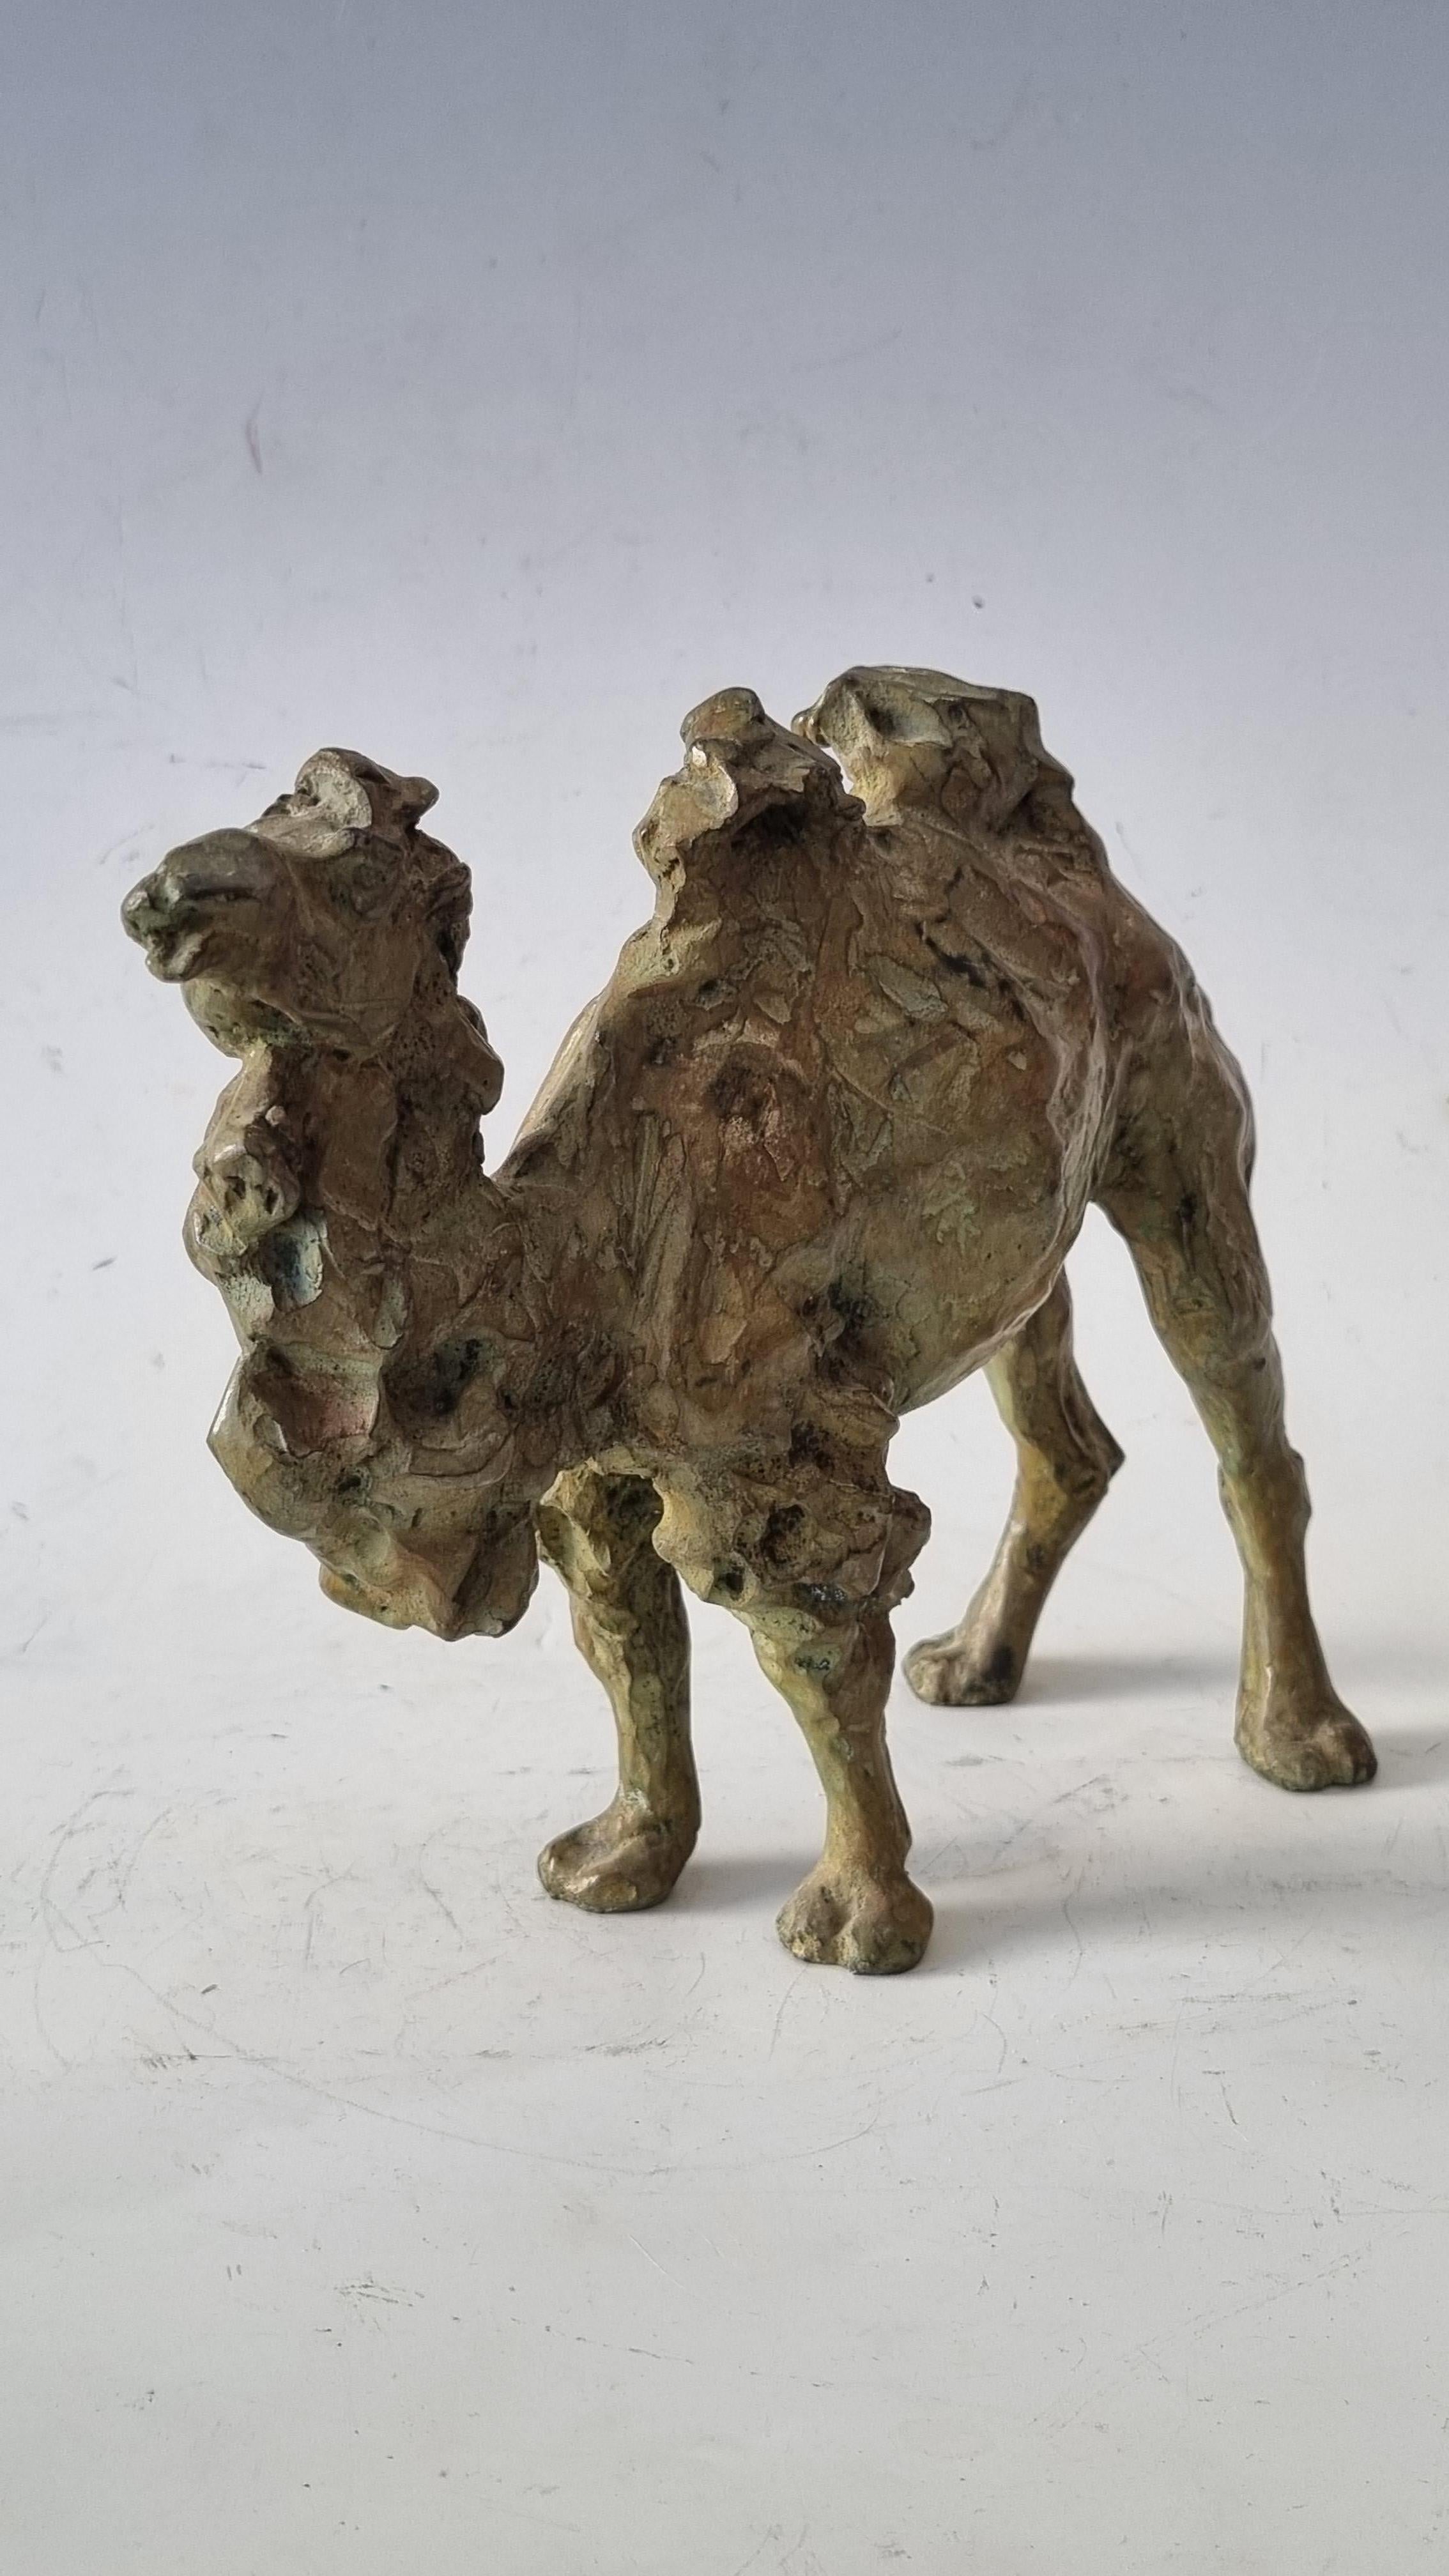 Lost wax bronze BBC (bronze Breith création 6/8)
foundry stamp and number on the side DELVAL 
foundry stamp and number on the side
Animal sculptor Sophie MARTIN creates from inert clay a whole living animal kingdom. She freely observes the animal